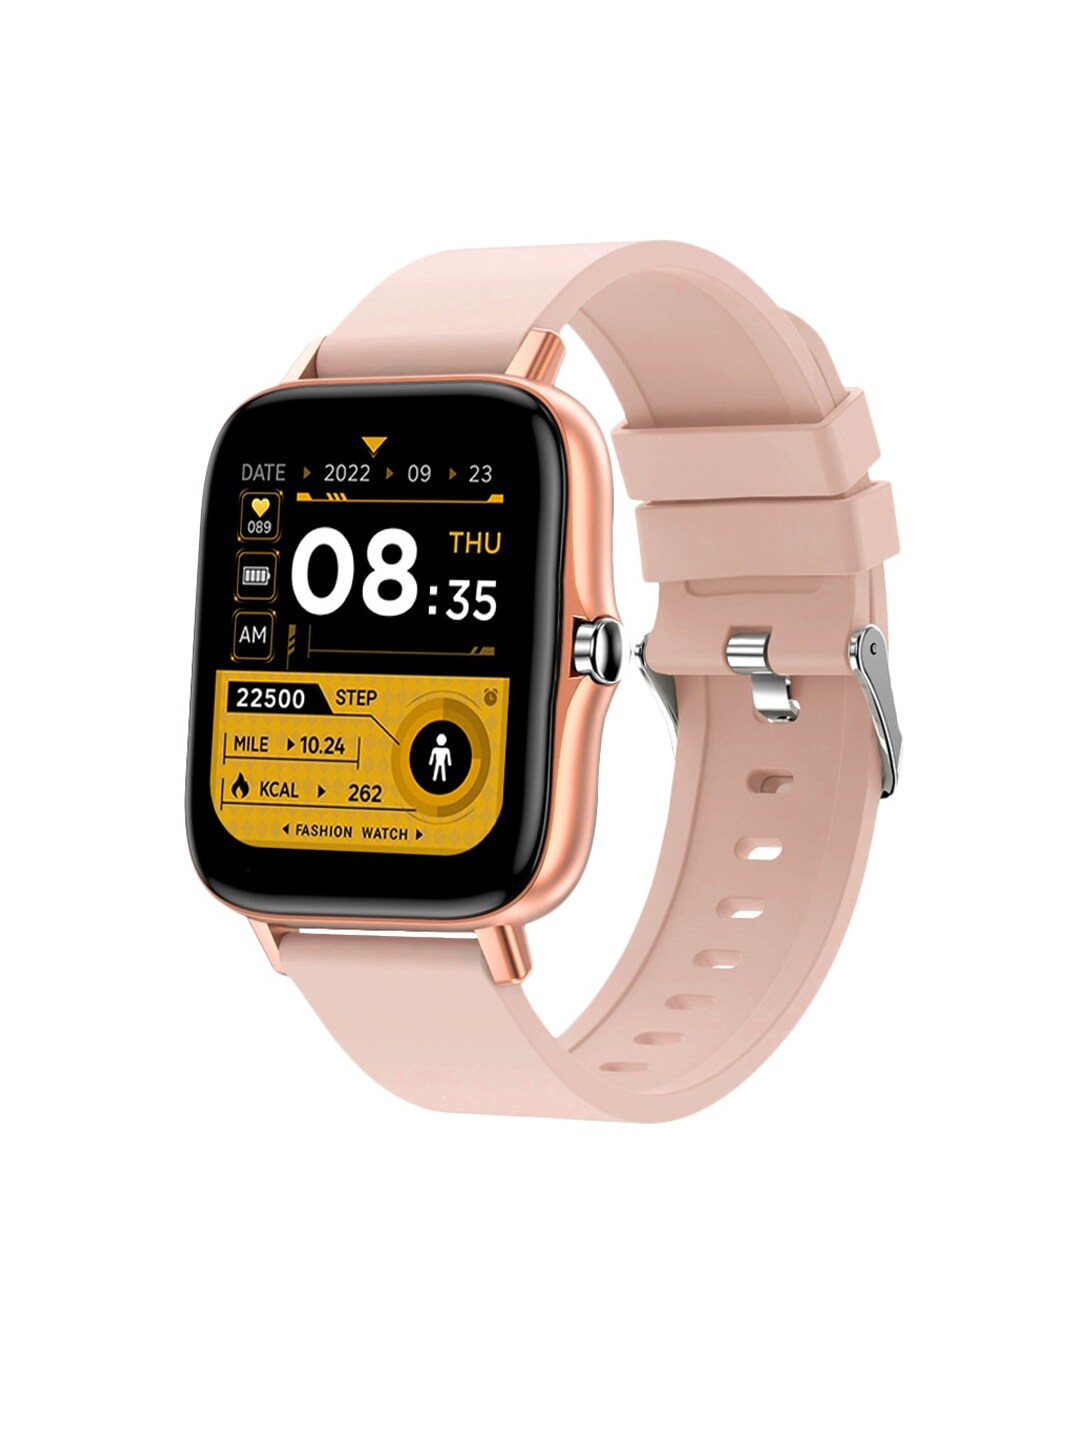 GIORDANO Rose Gold-Toned Bluetooth Enabled Smartwatch R6-W31-03 Price in India